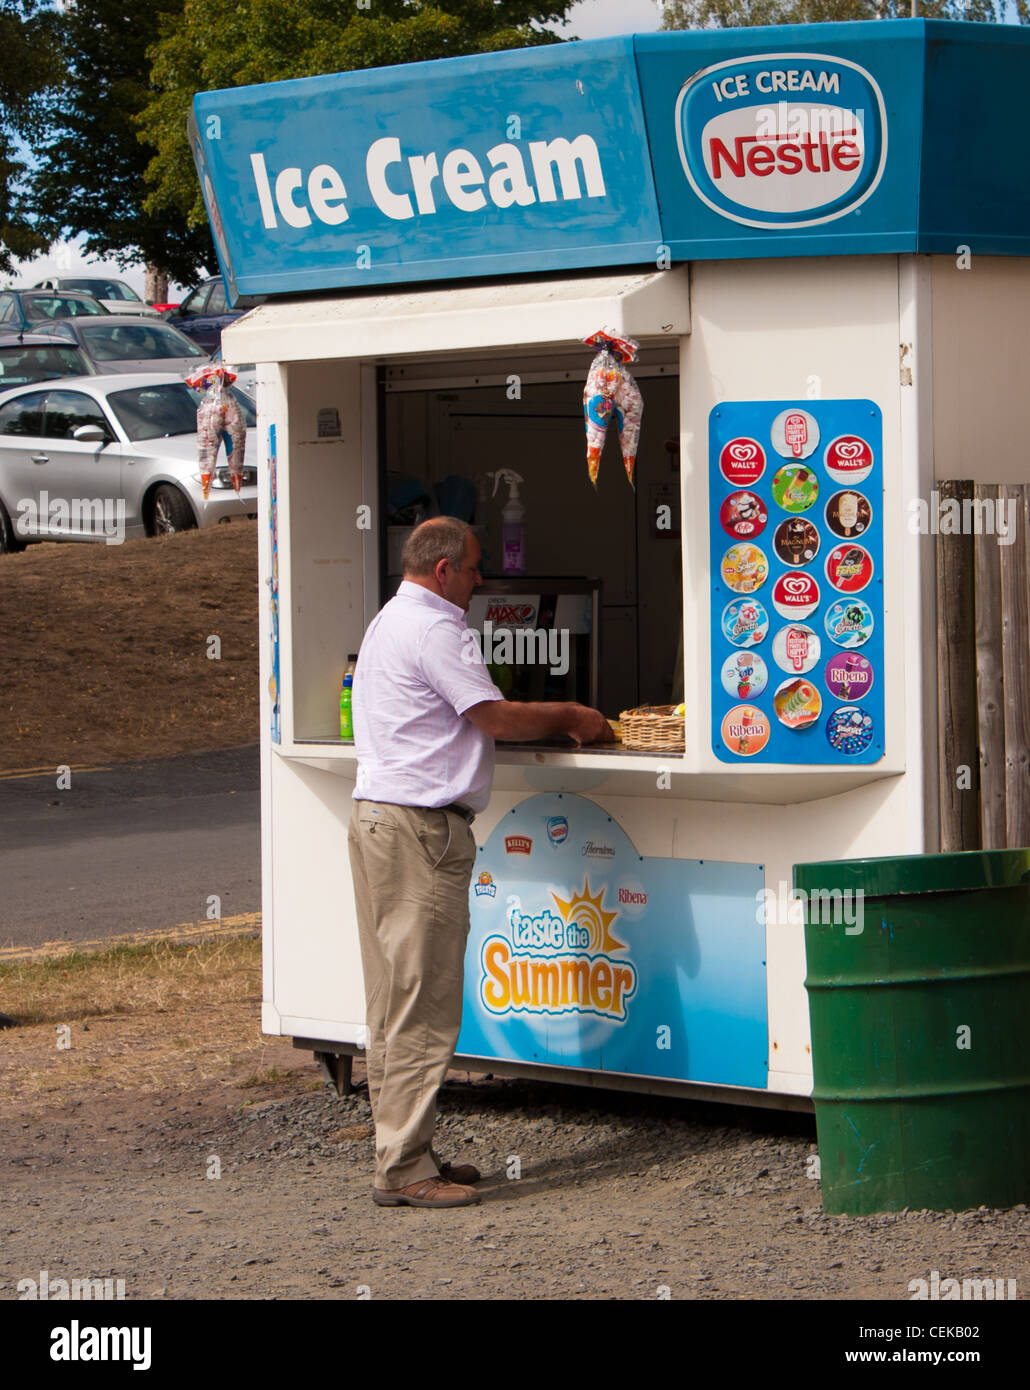 An icecream kiosk near the seaside perfect for buying icecreams in the summer sun while on a family holiday Stock Photo